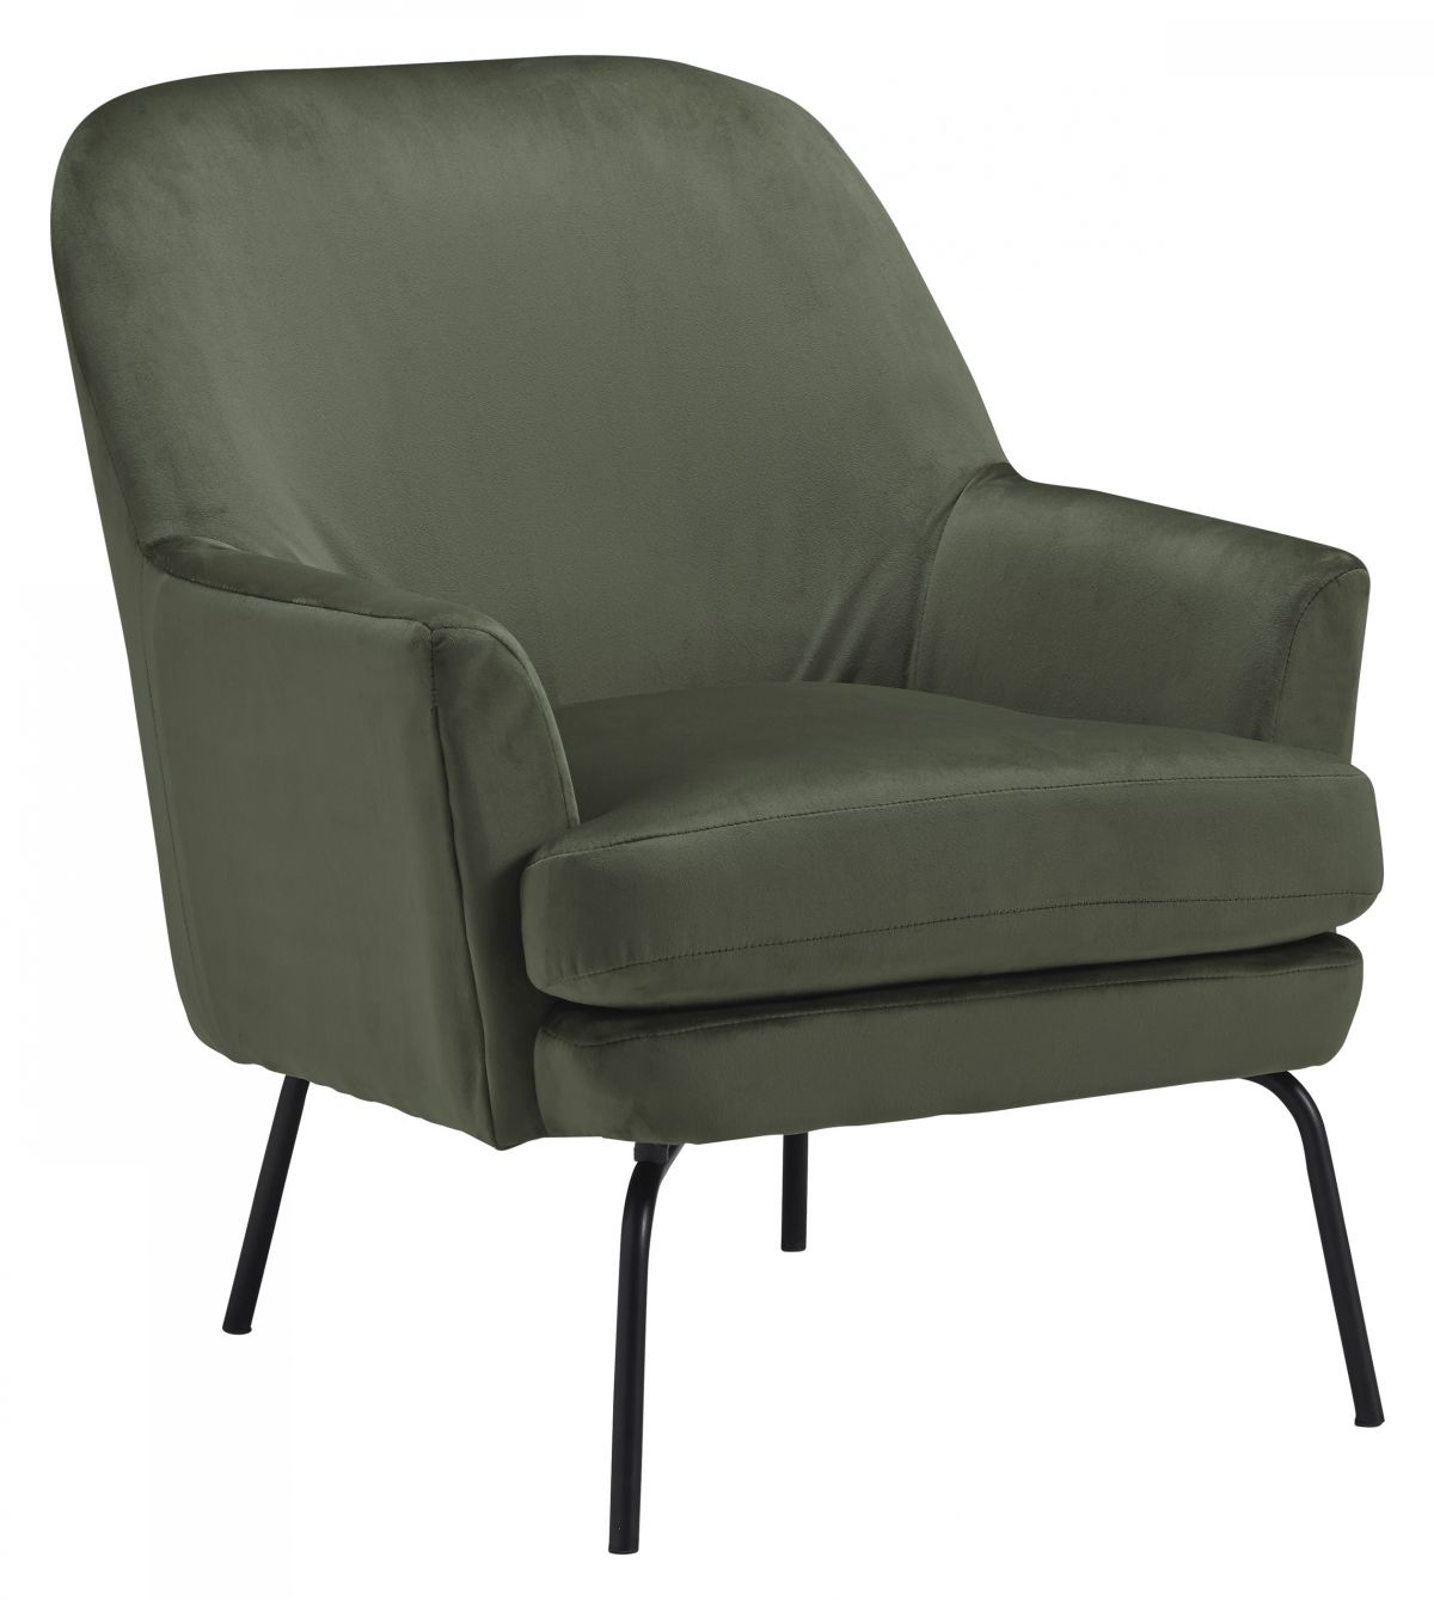 Picture of Dericka Accent Chair